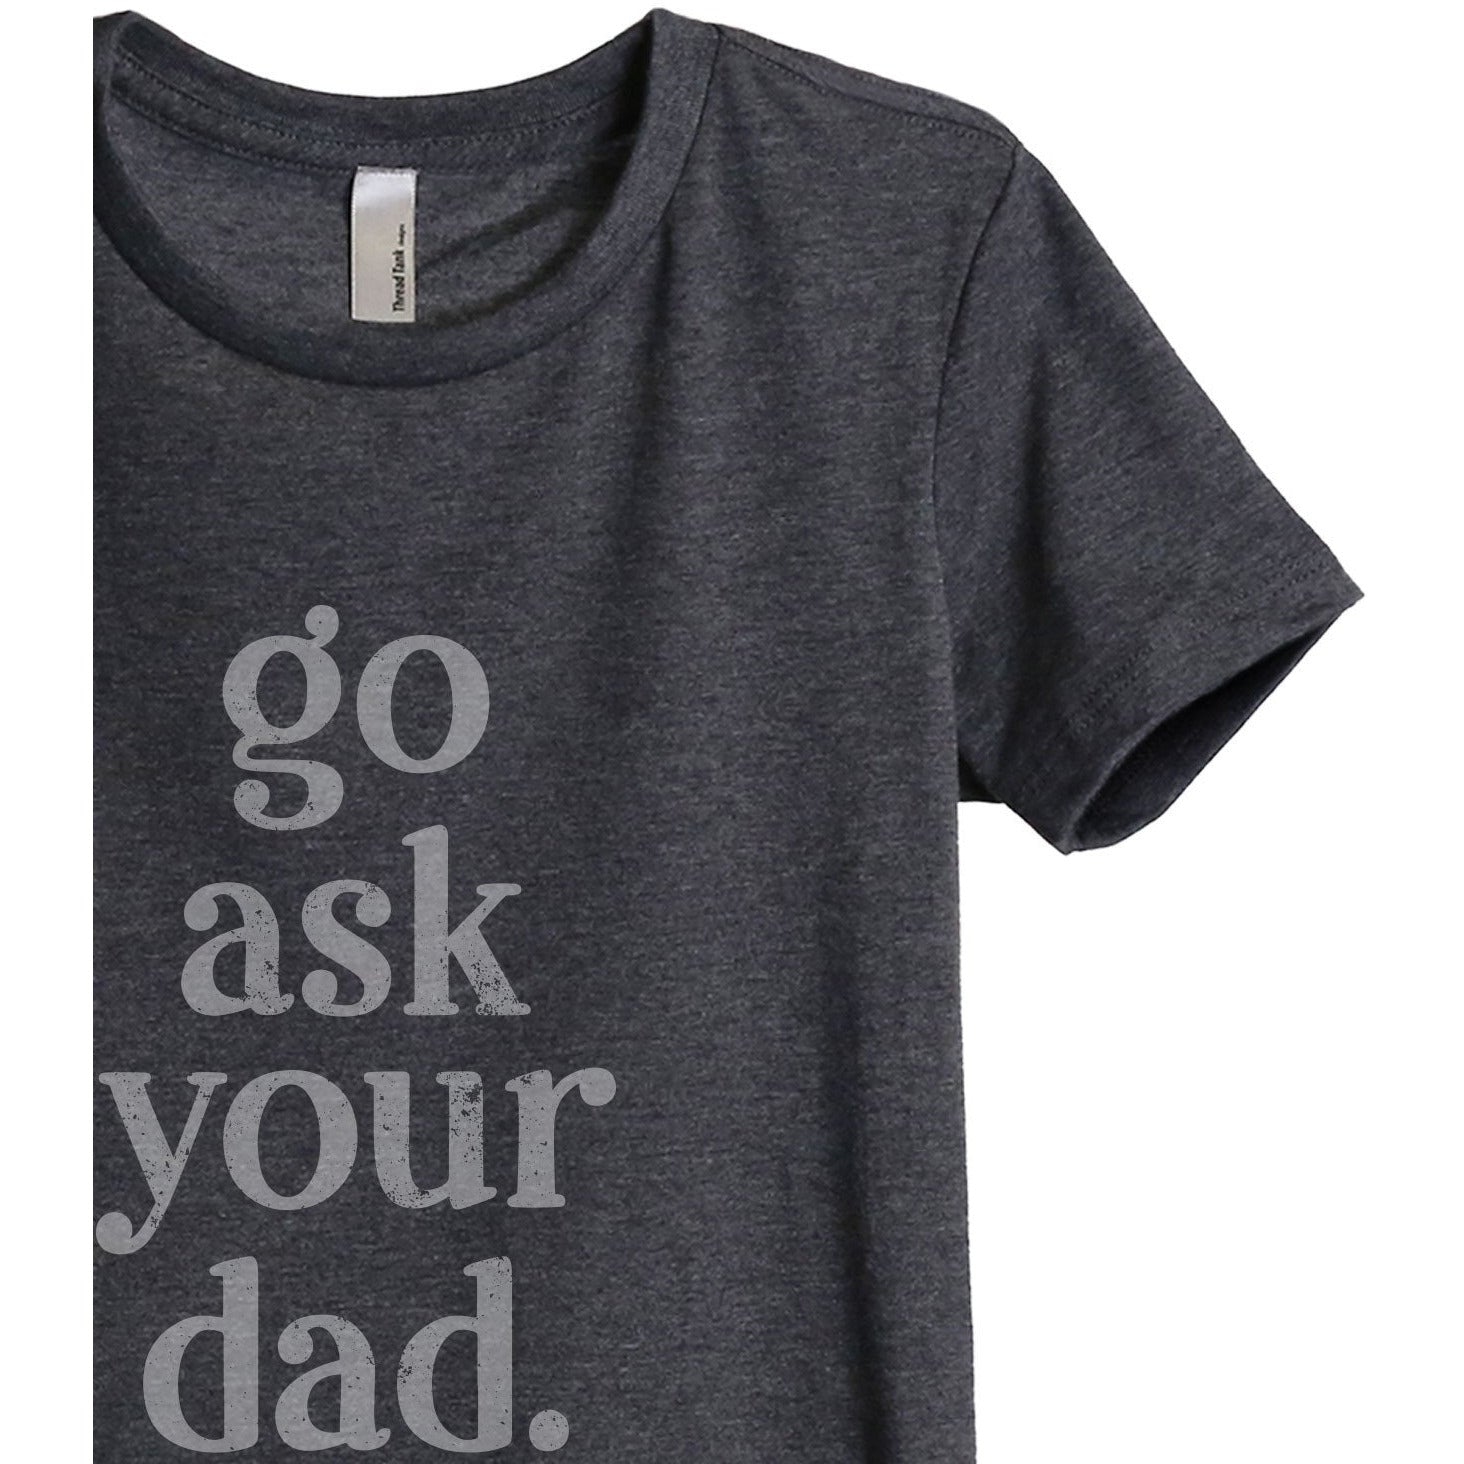 Go Ask Your Dad Women's Relaxed Crewneck T-Shirt Top Tee Charcoal Grey Zoom Details